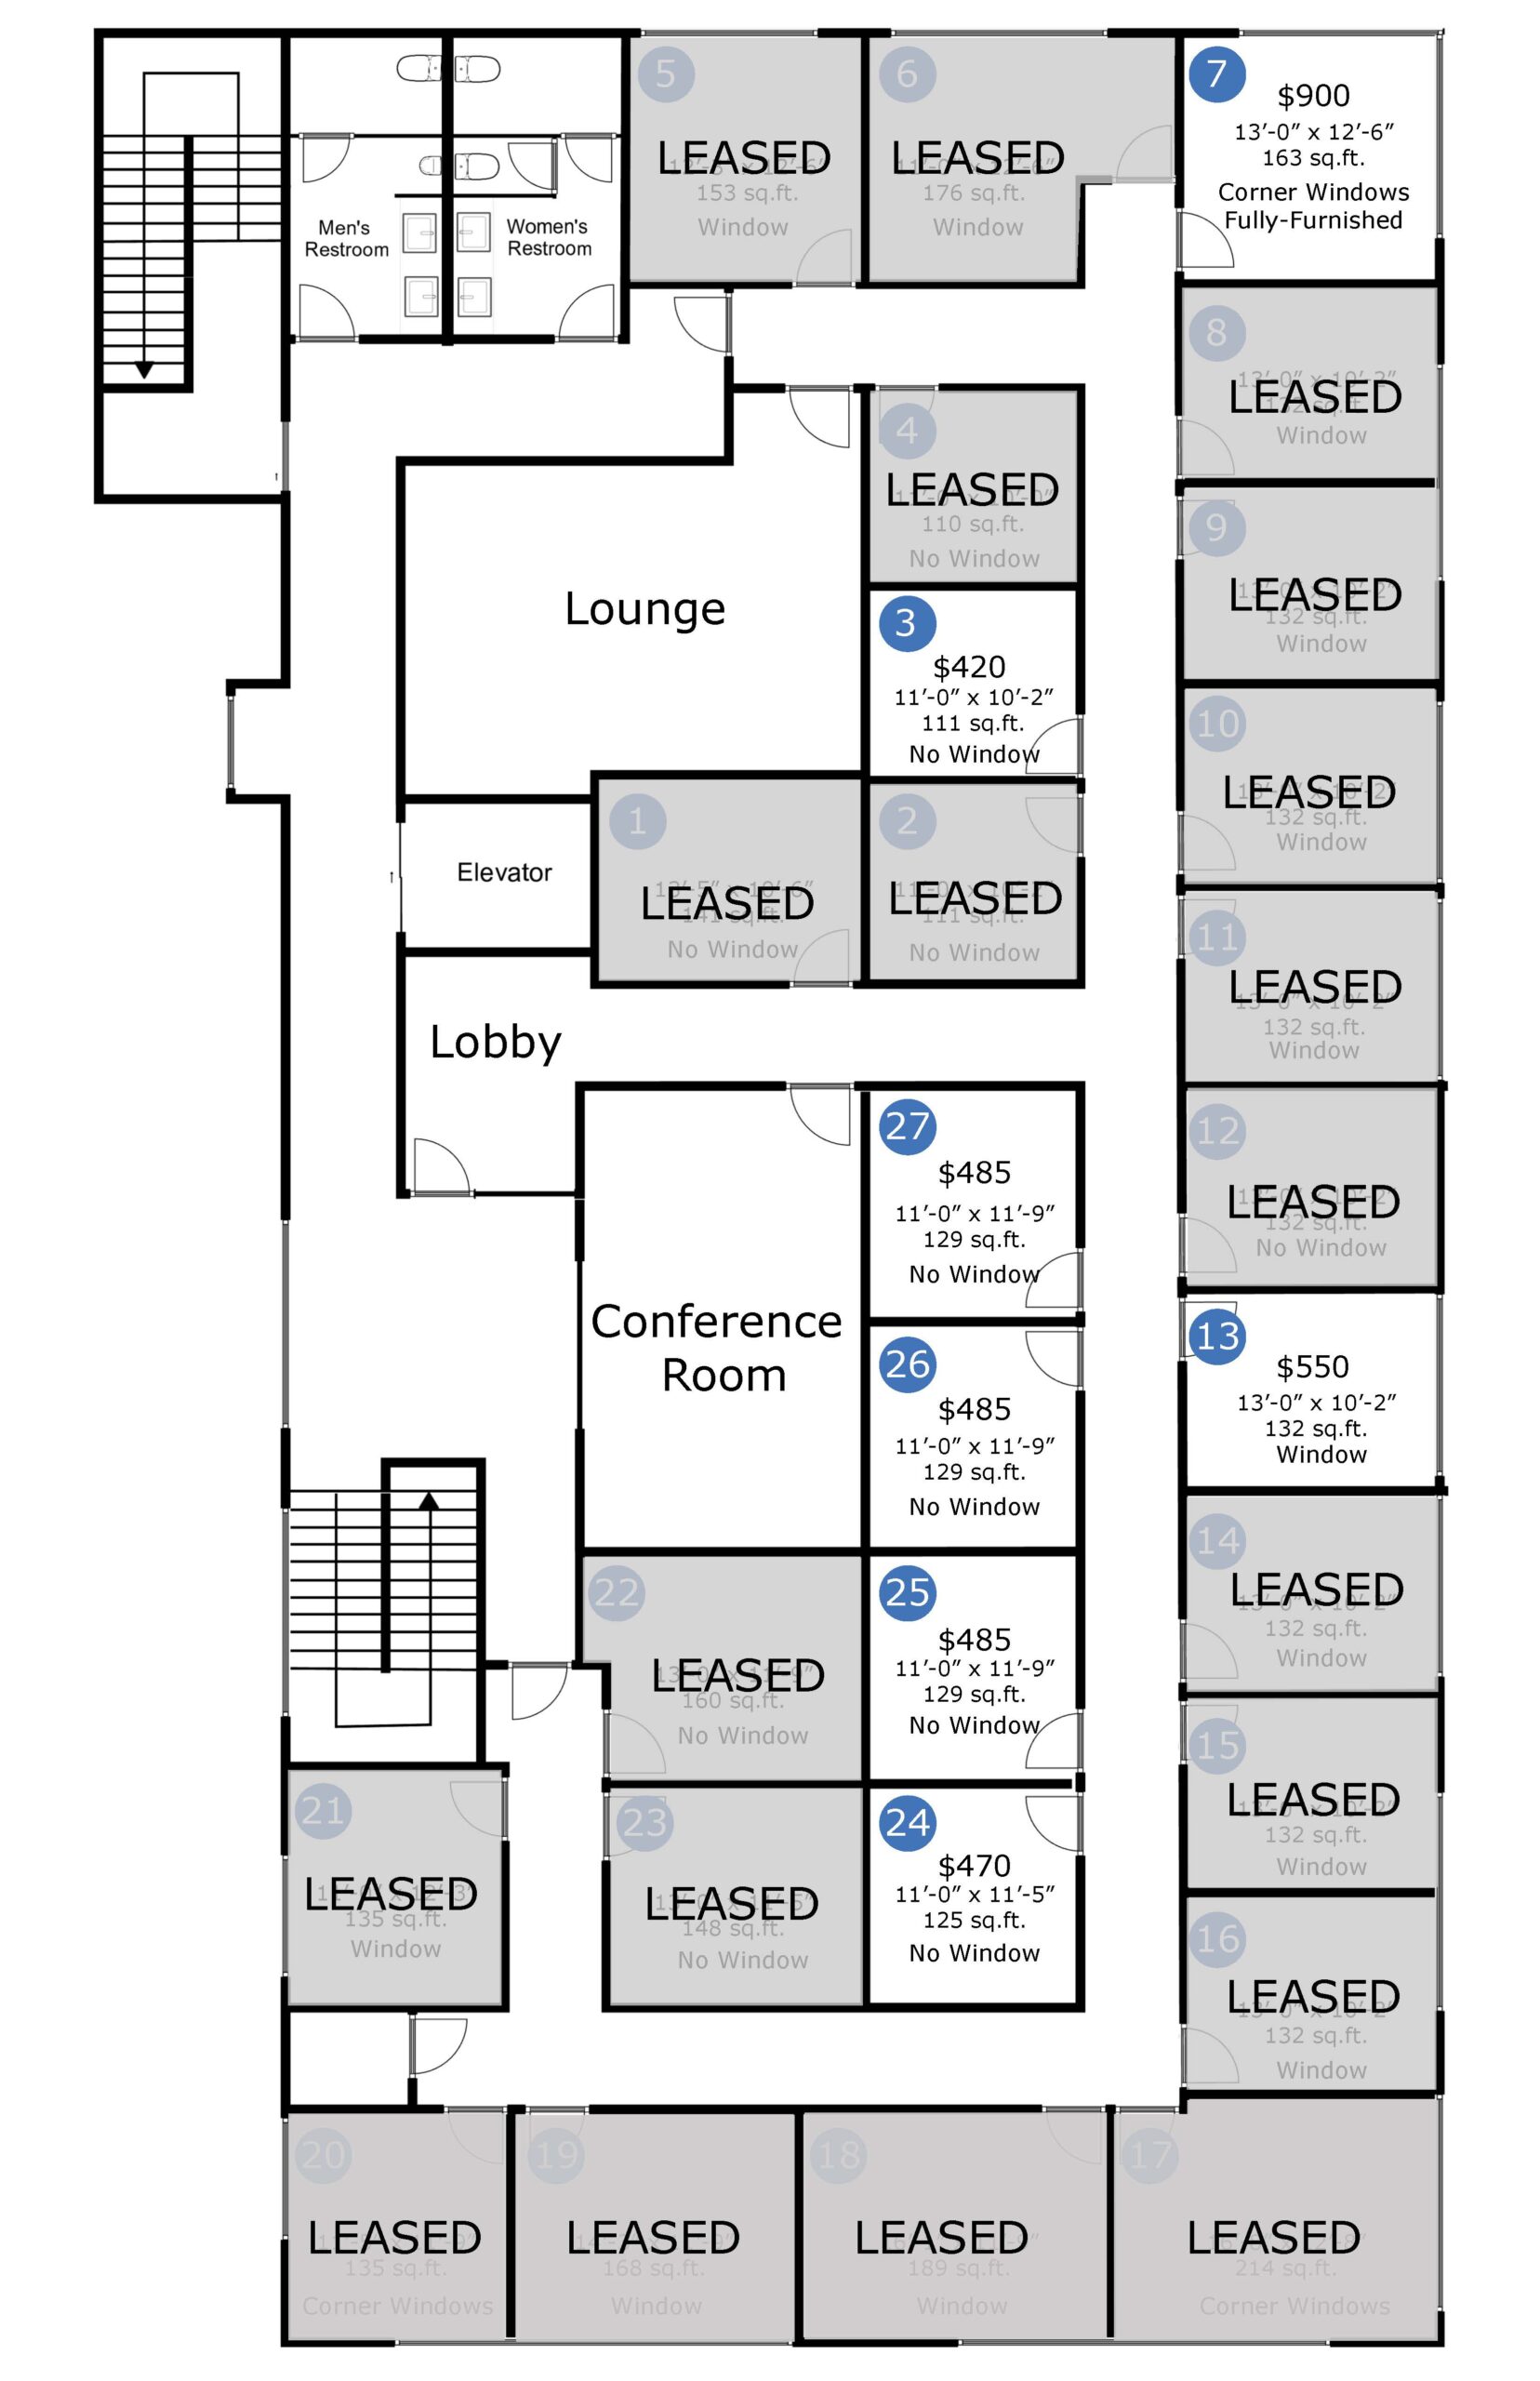 CBS Floor Plan with size and price